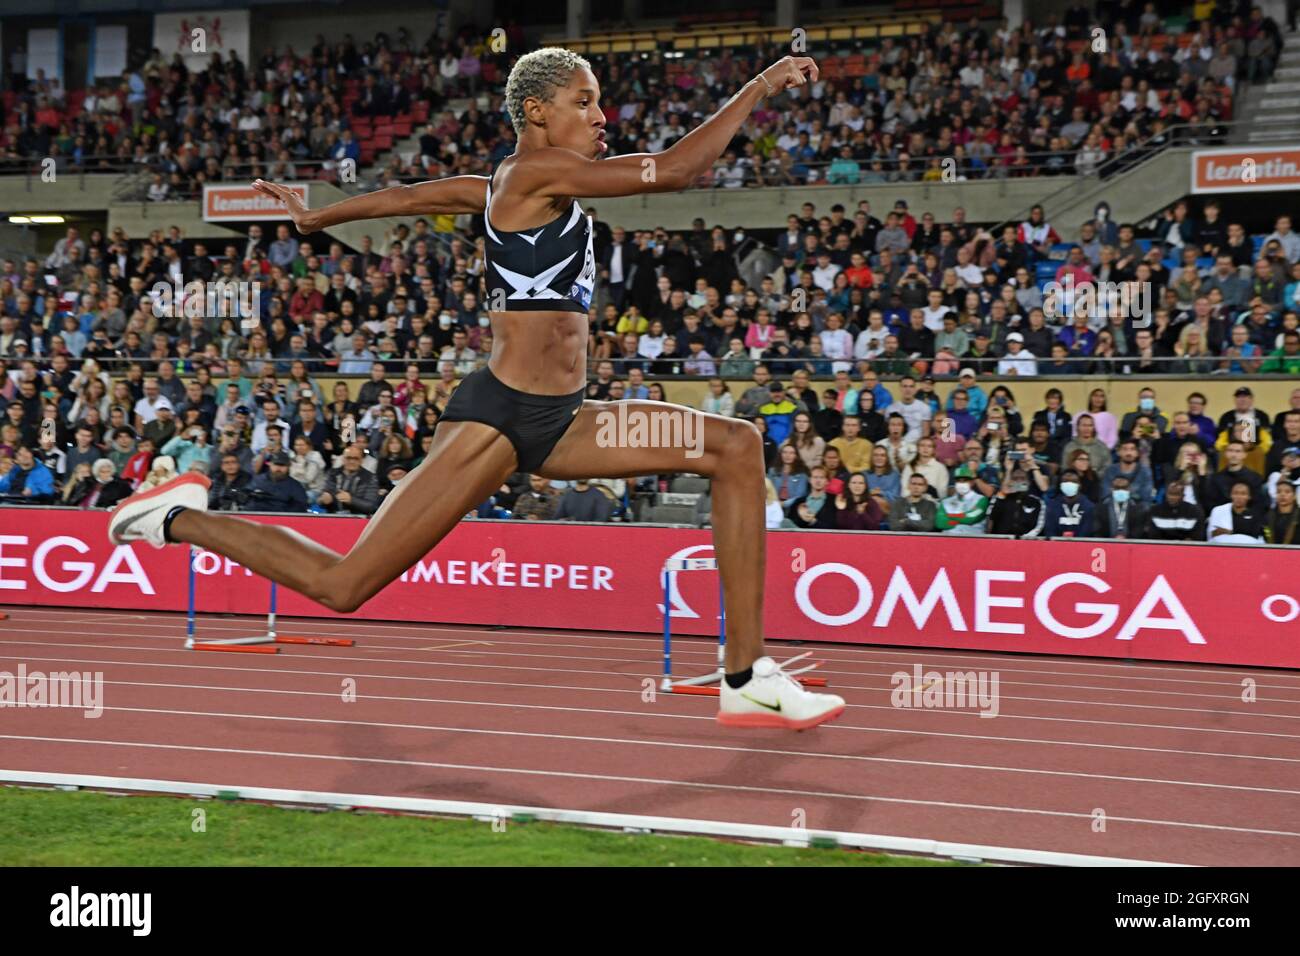 Yulimar Rojas (VEN) wins the women's triple jump in a wind-aided 51-0 3/4  (15.56) during the Athletissima meeting Stade Olympique de la Pontaise,  Thursday, Aug. 26, 2021, in Lausanne, Switzerland. (Jiro Mochizuki/Image